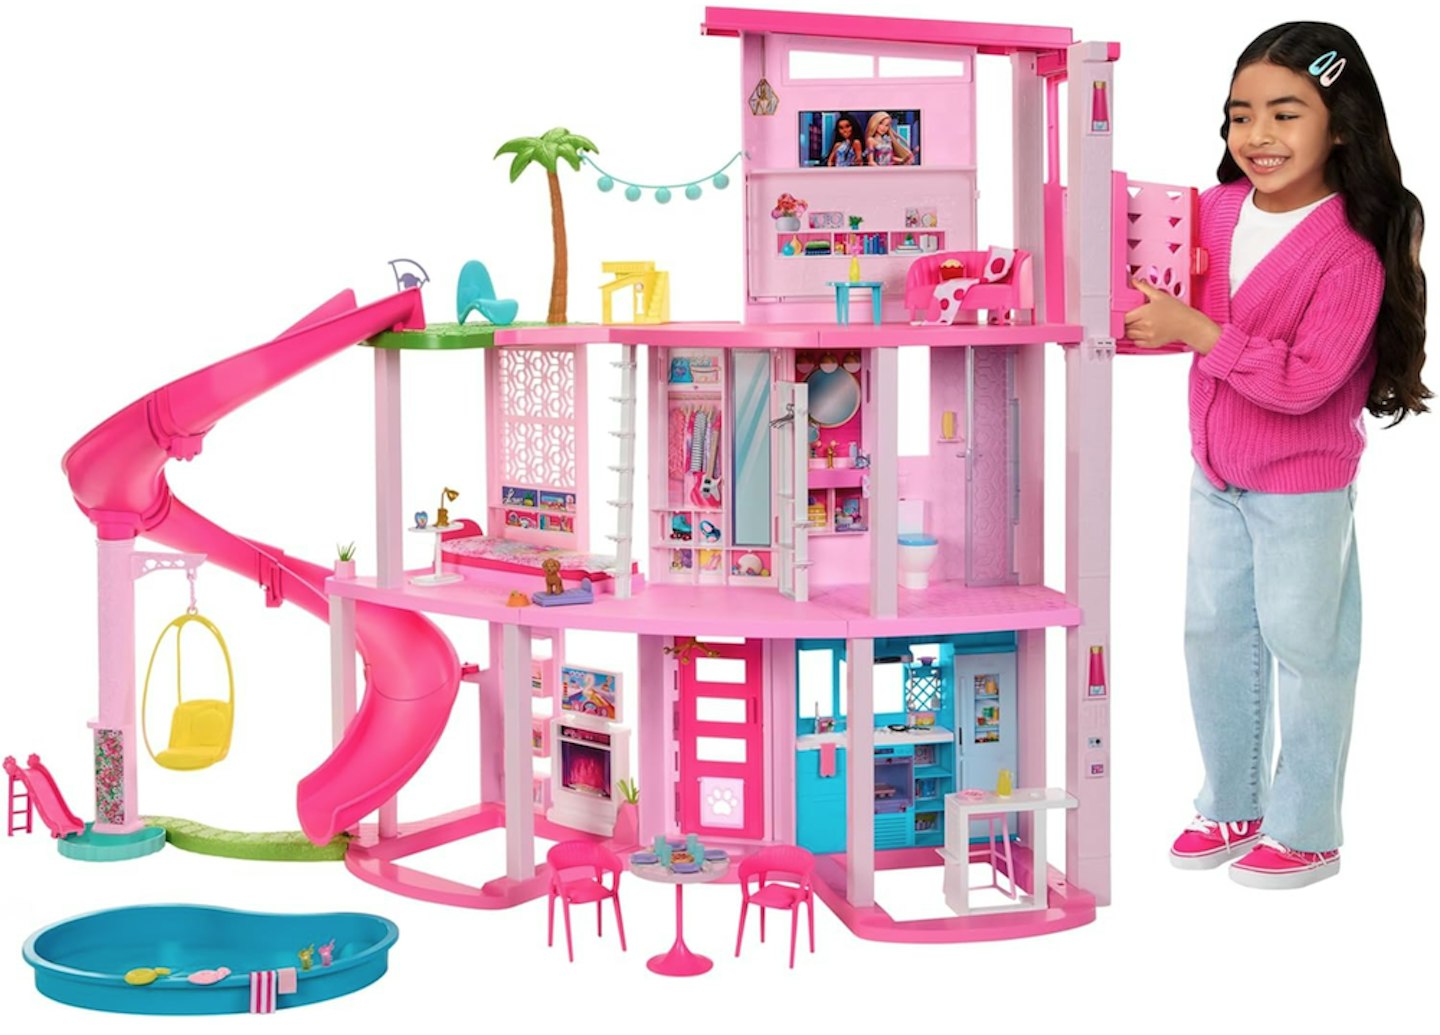 Barbie Dreamhouse, 3-Storey Barbie House with 10 Play Areas